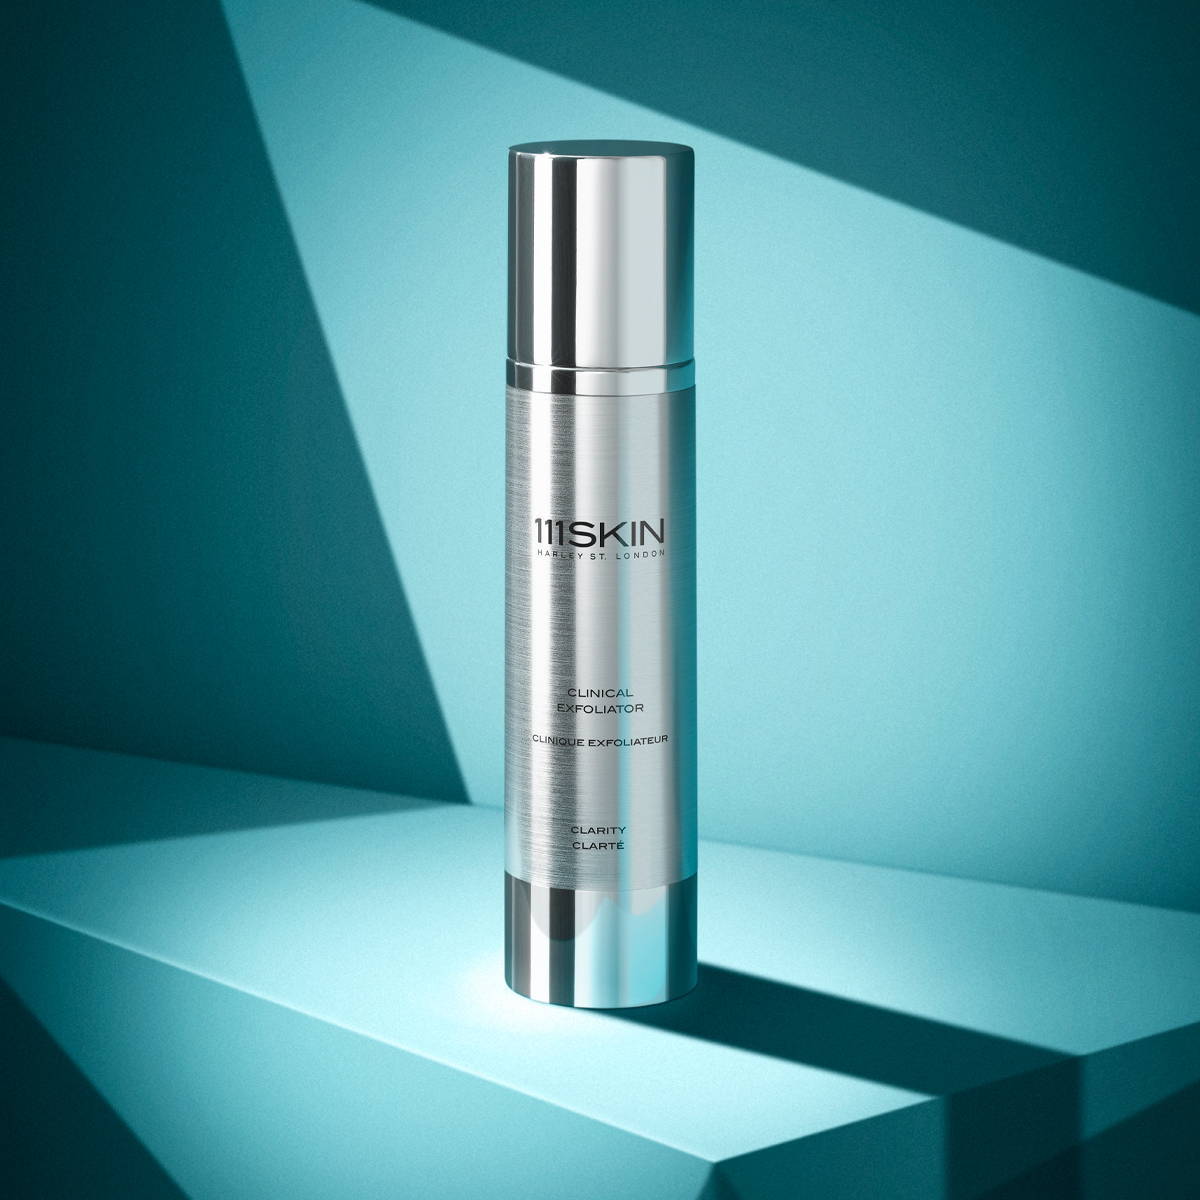 The clinical exfoliator from 111skin